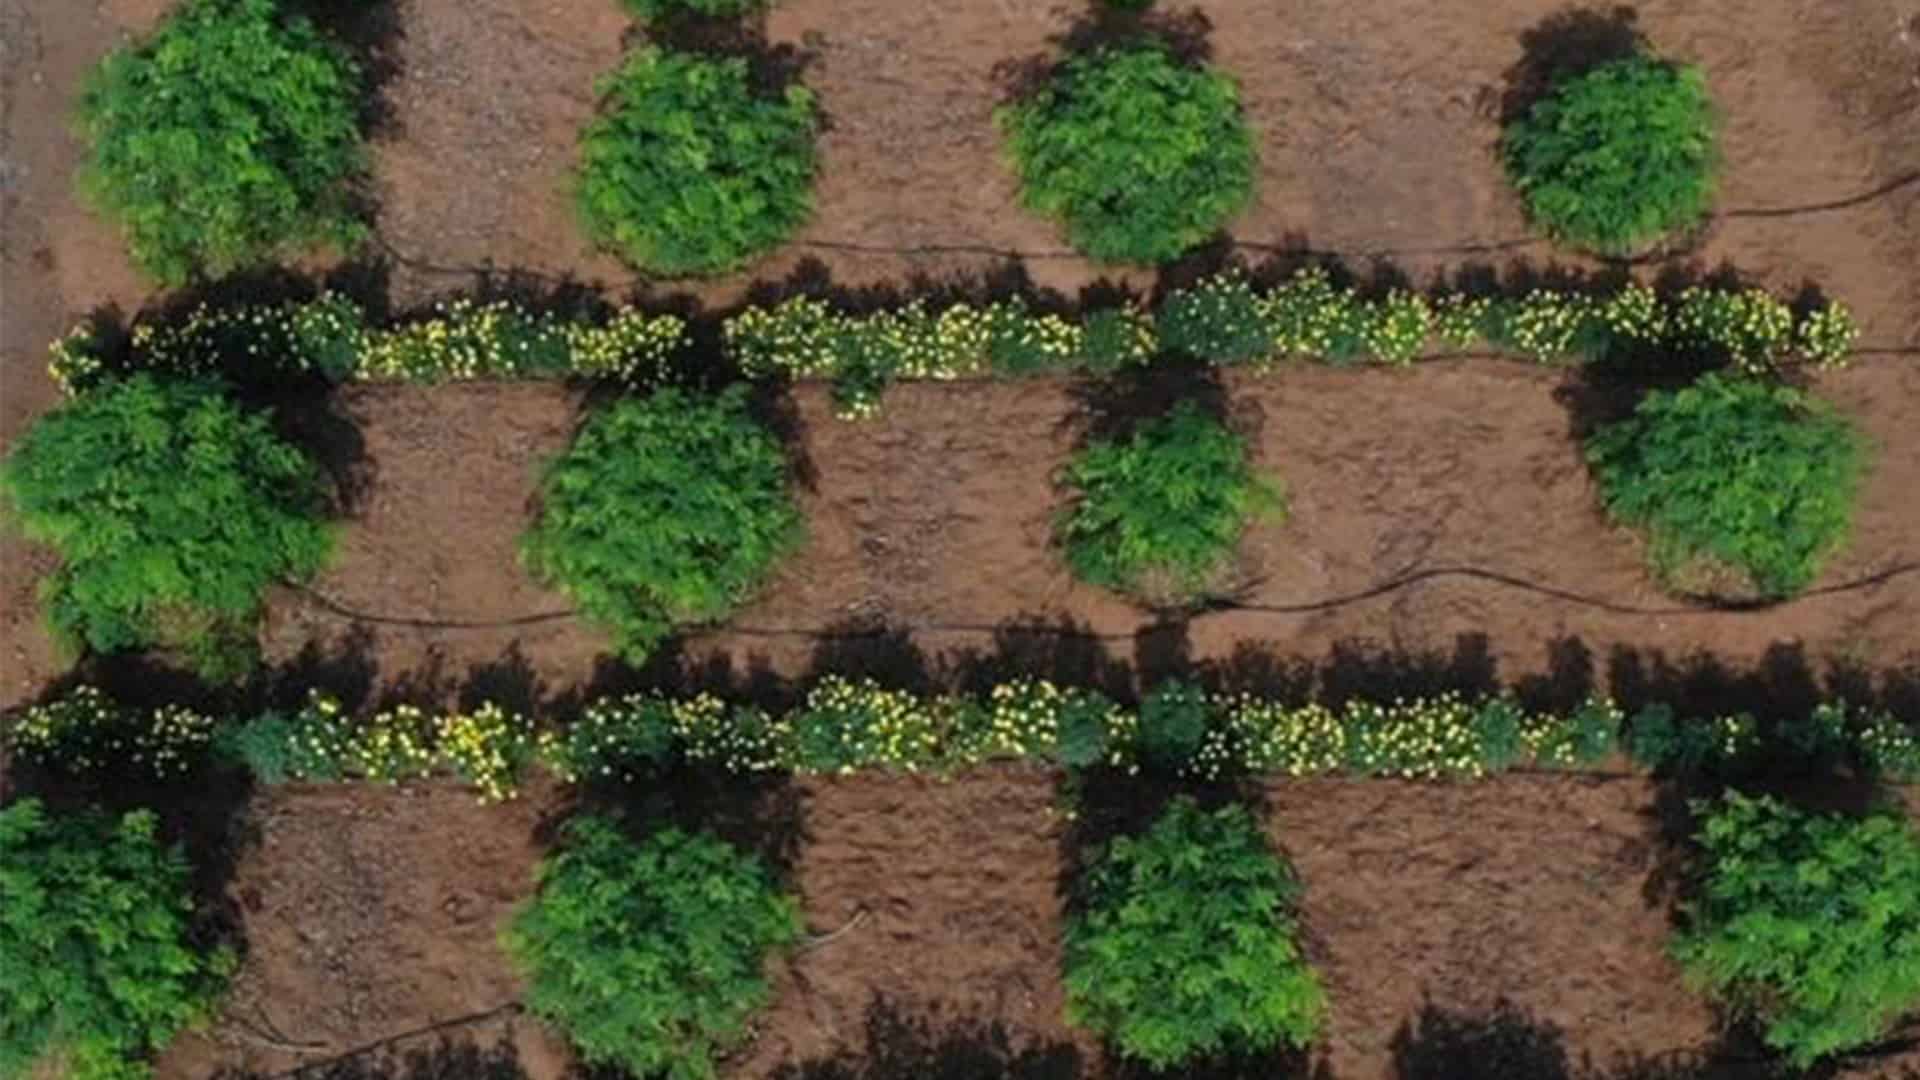 Aerial view of a farm in Tamil Nadu where Marigold flowers are grown alongside moringa trees. 